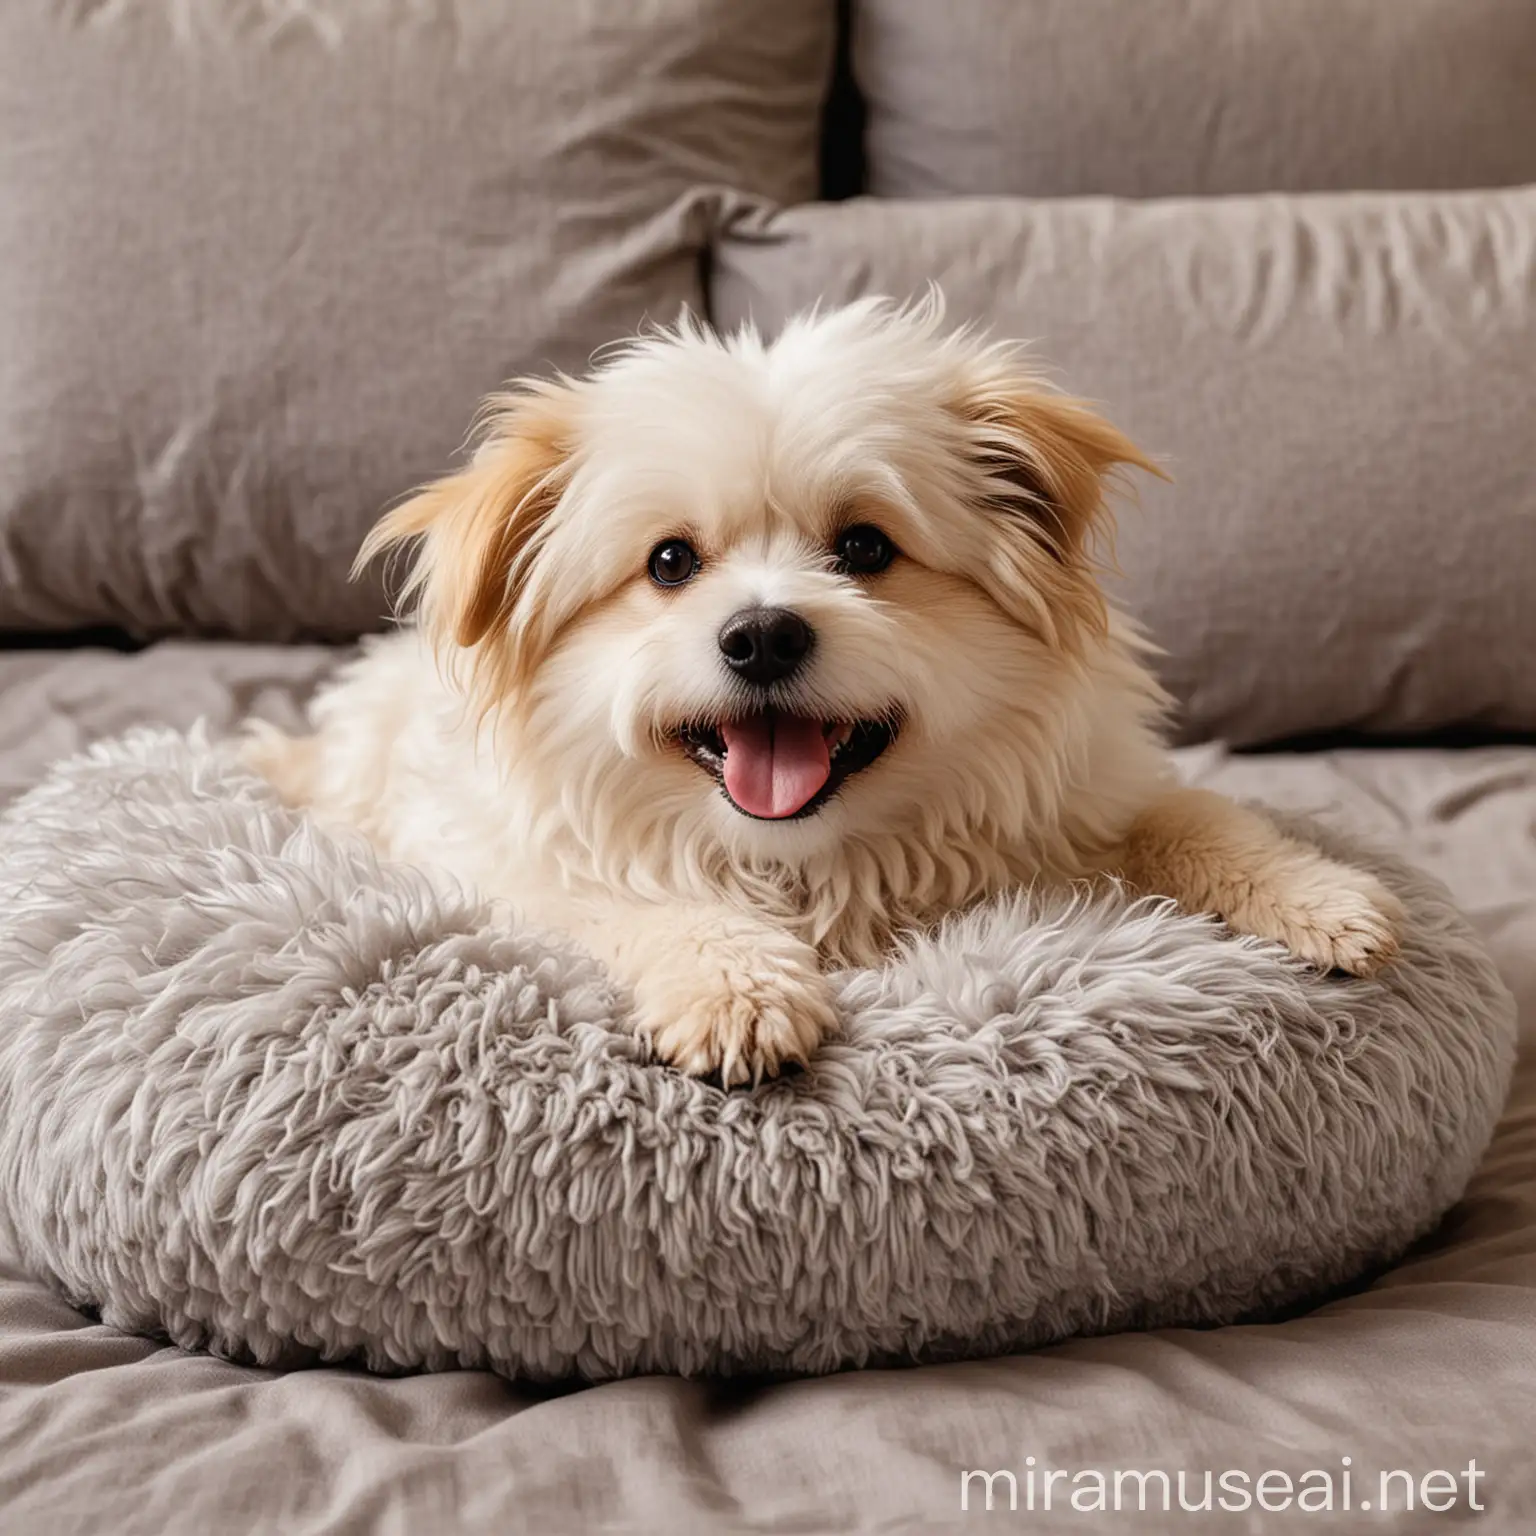 A fluffy cheerful dog is lying on a small pillow